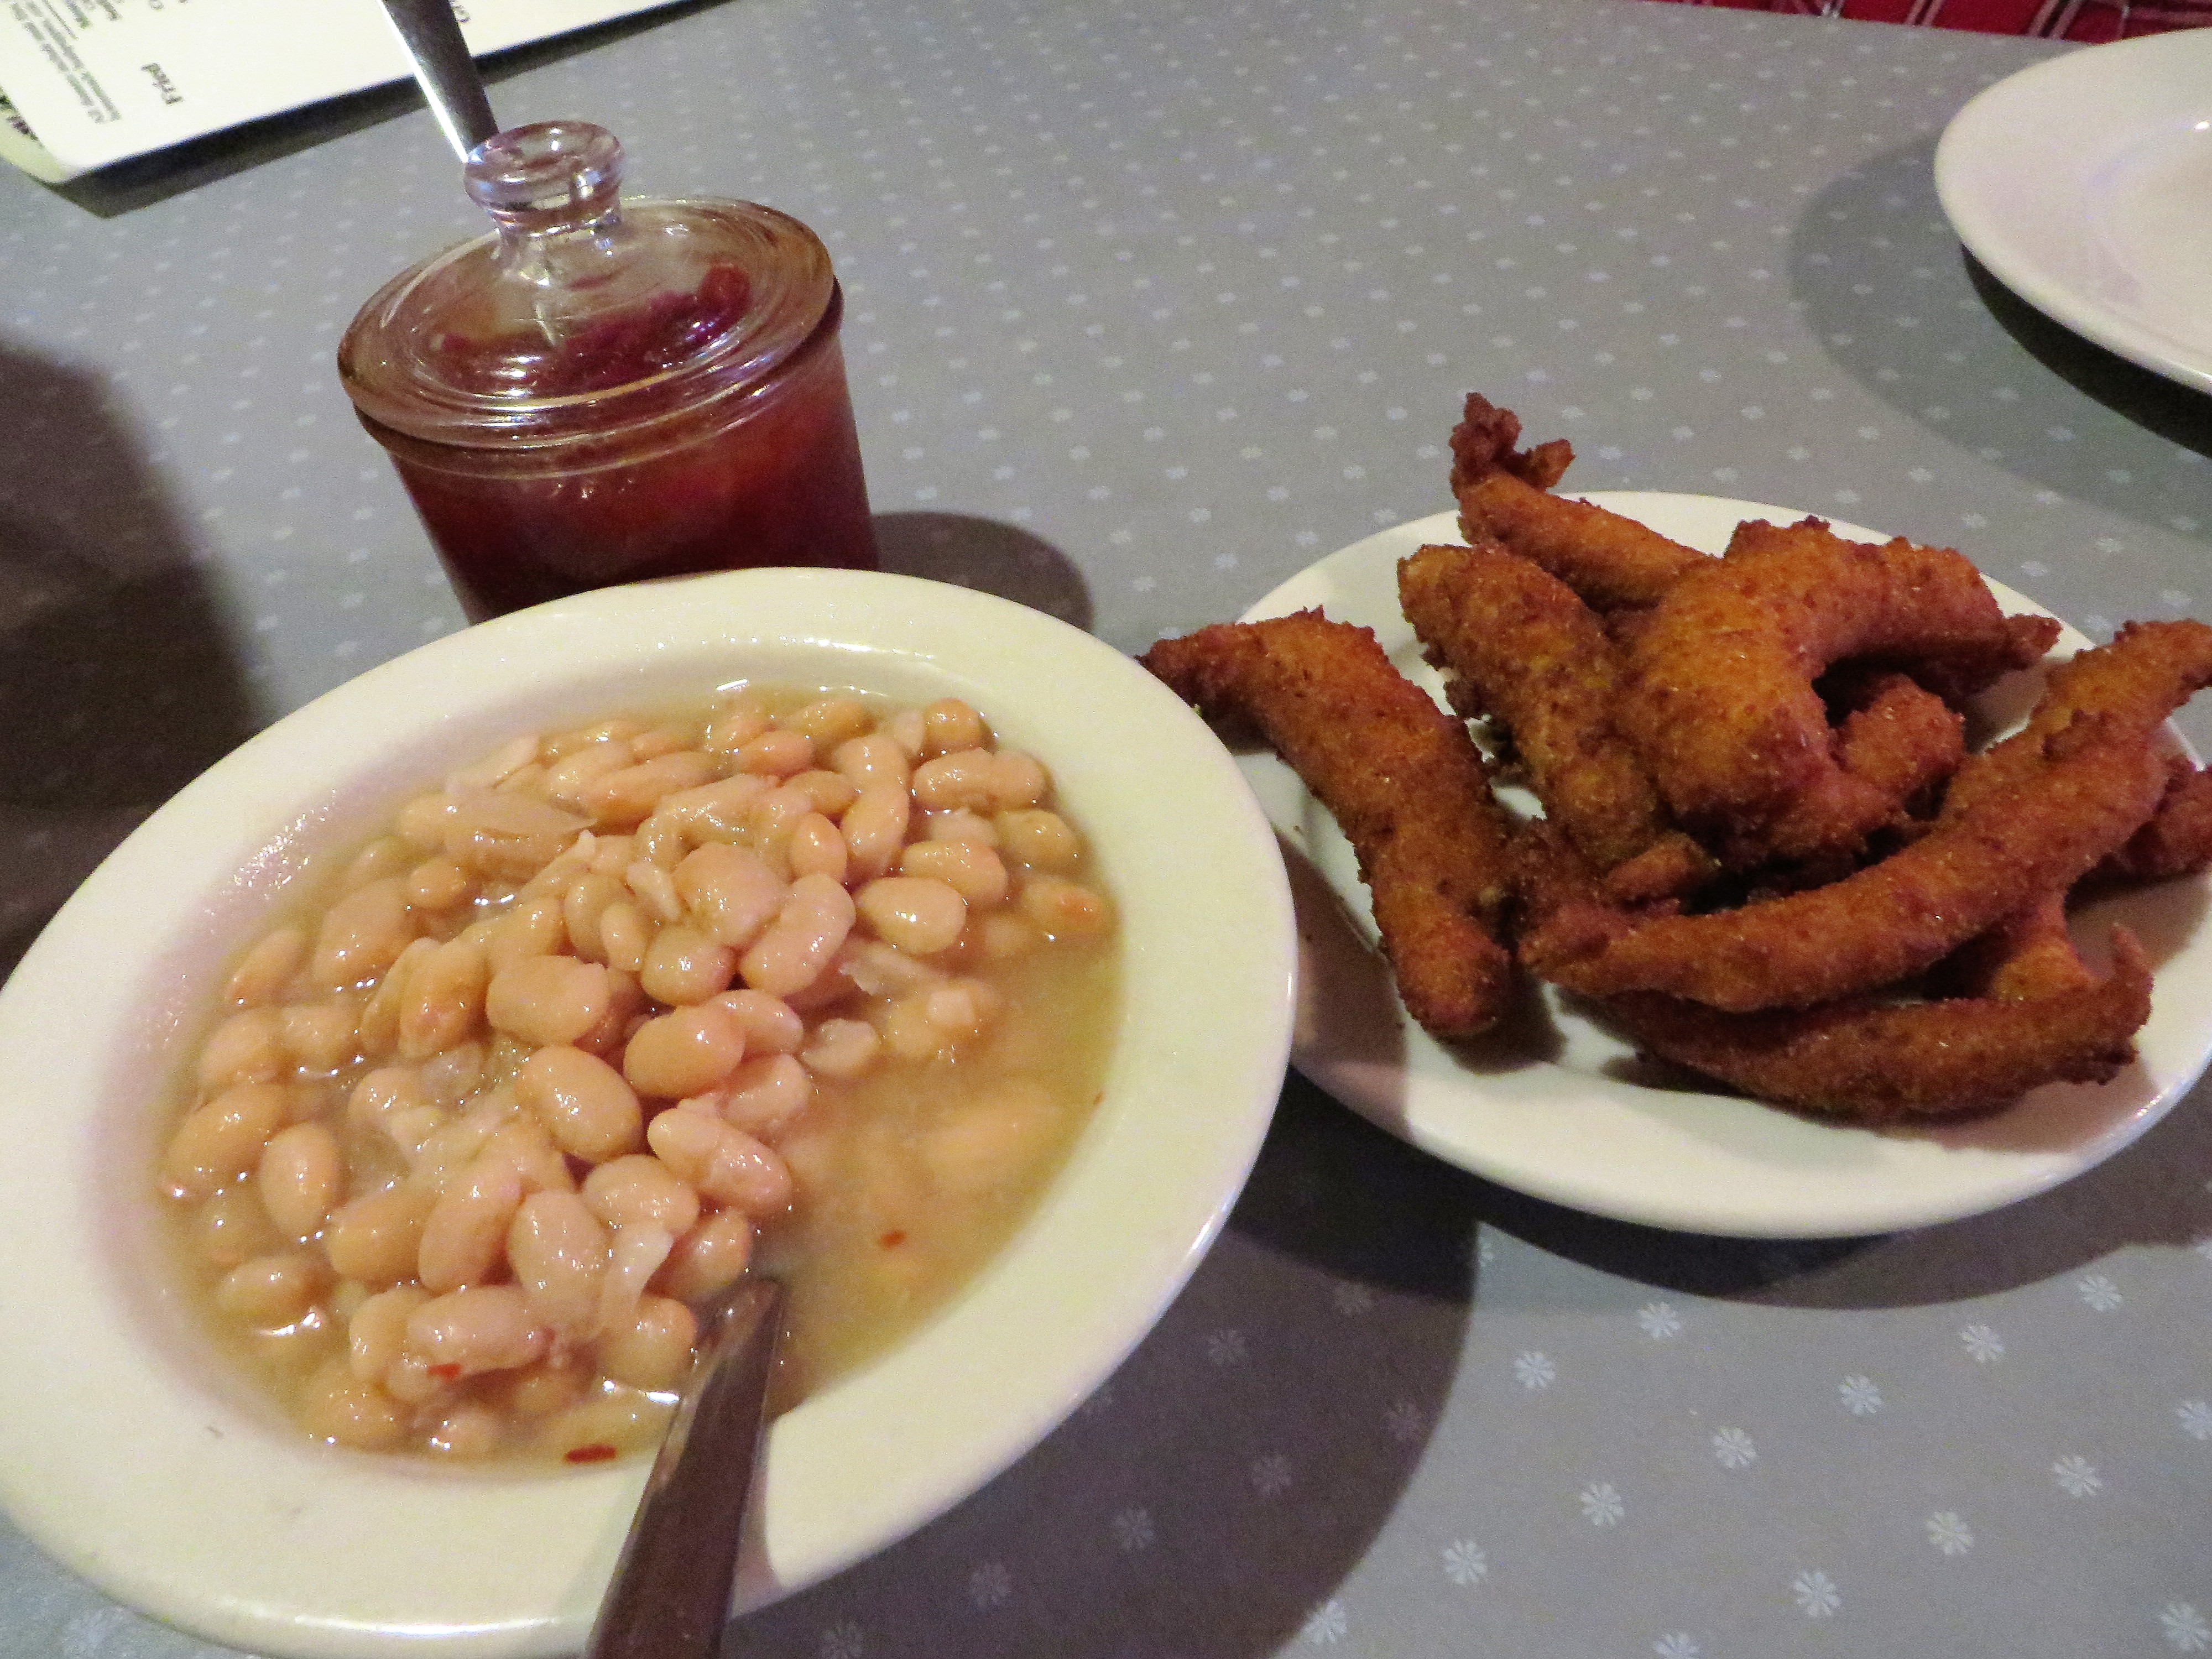 Northern beans and hush puppies